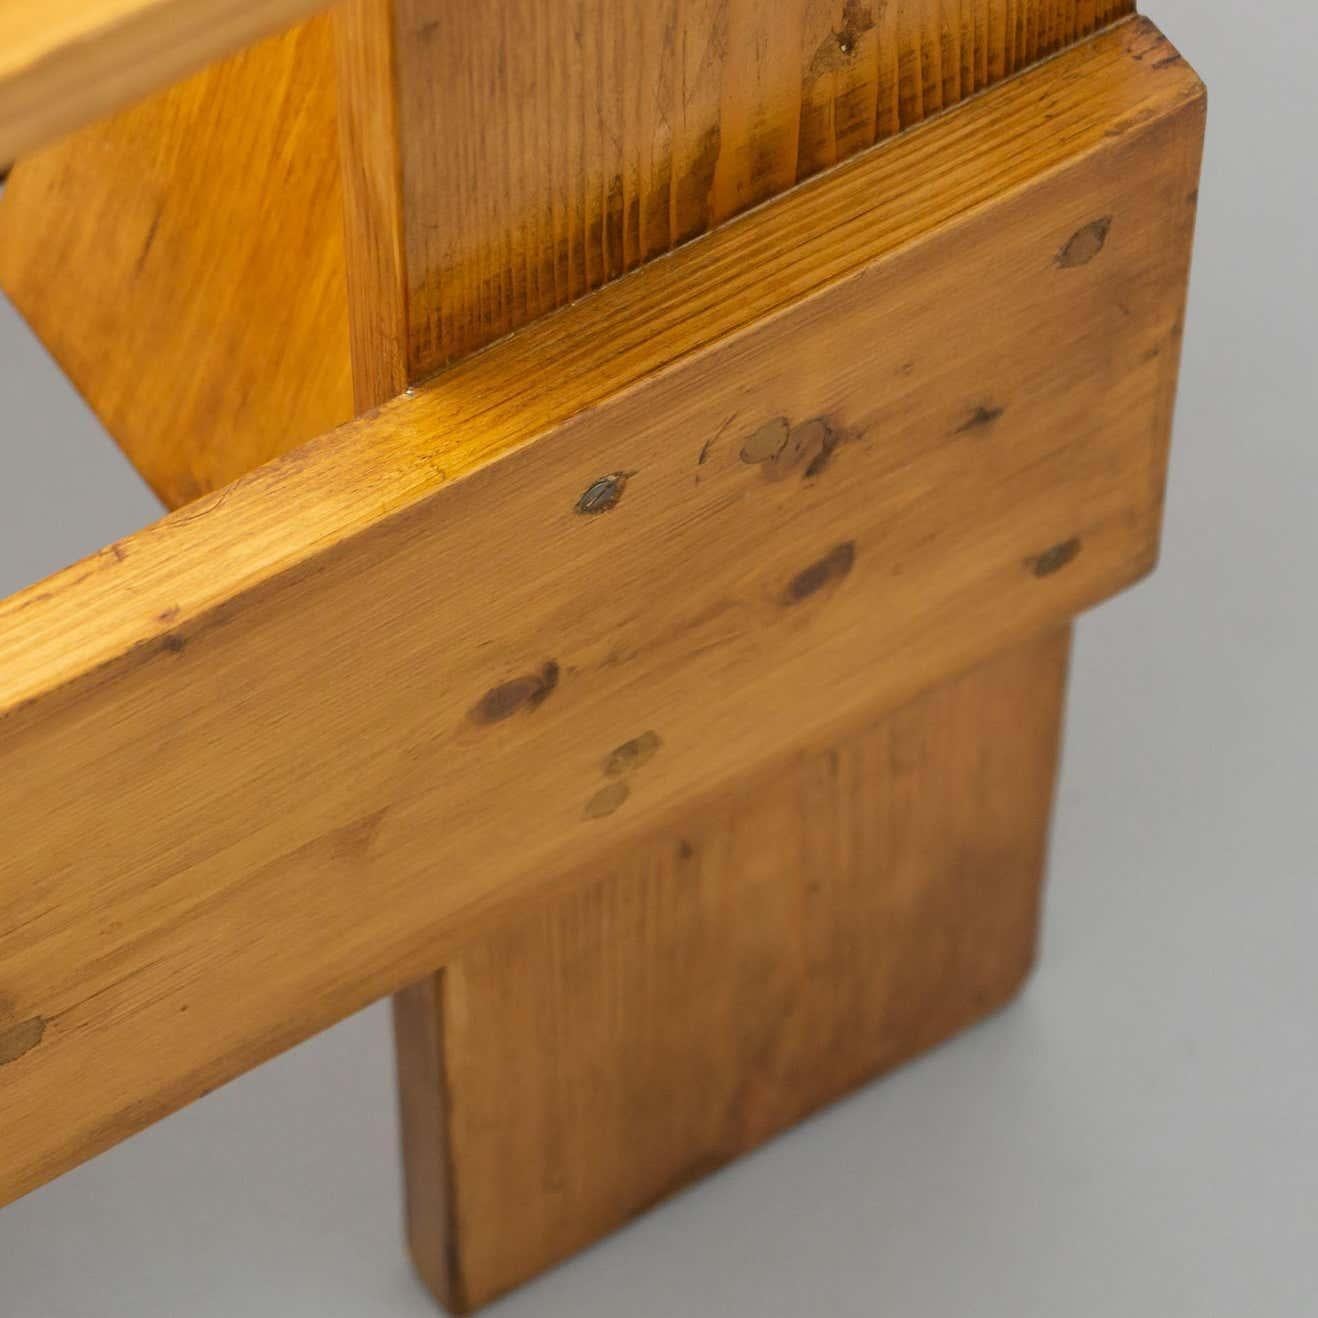 Gerrit Rietveld Mid-Century Modern Wood Crate Chair, circa 1950 For Sale 7